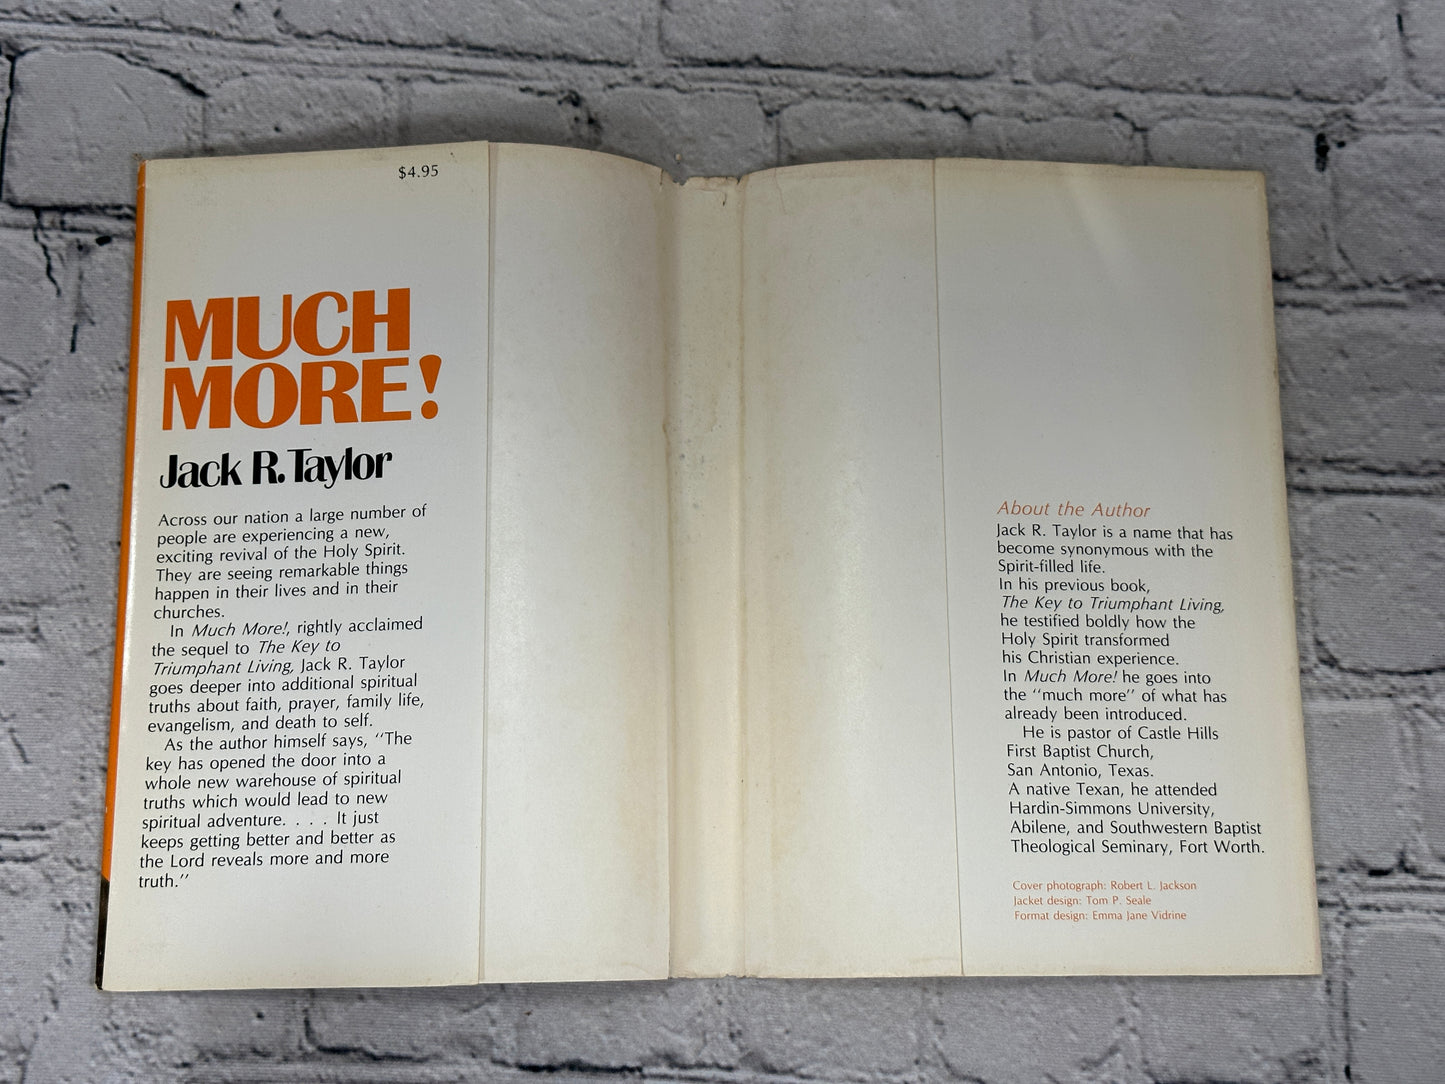 Much More! By Jack R. Taylor [1972]